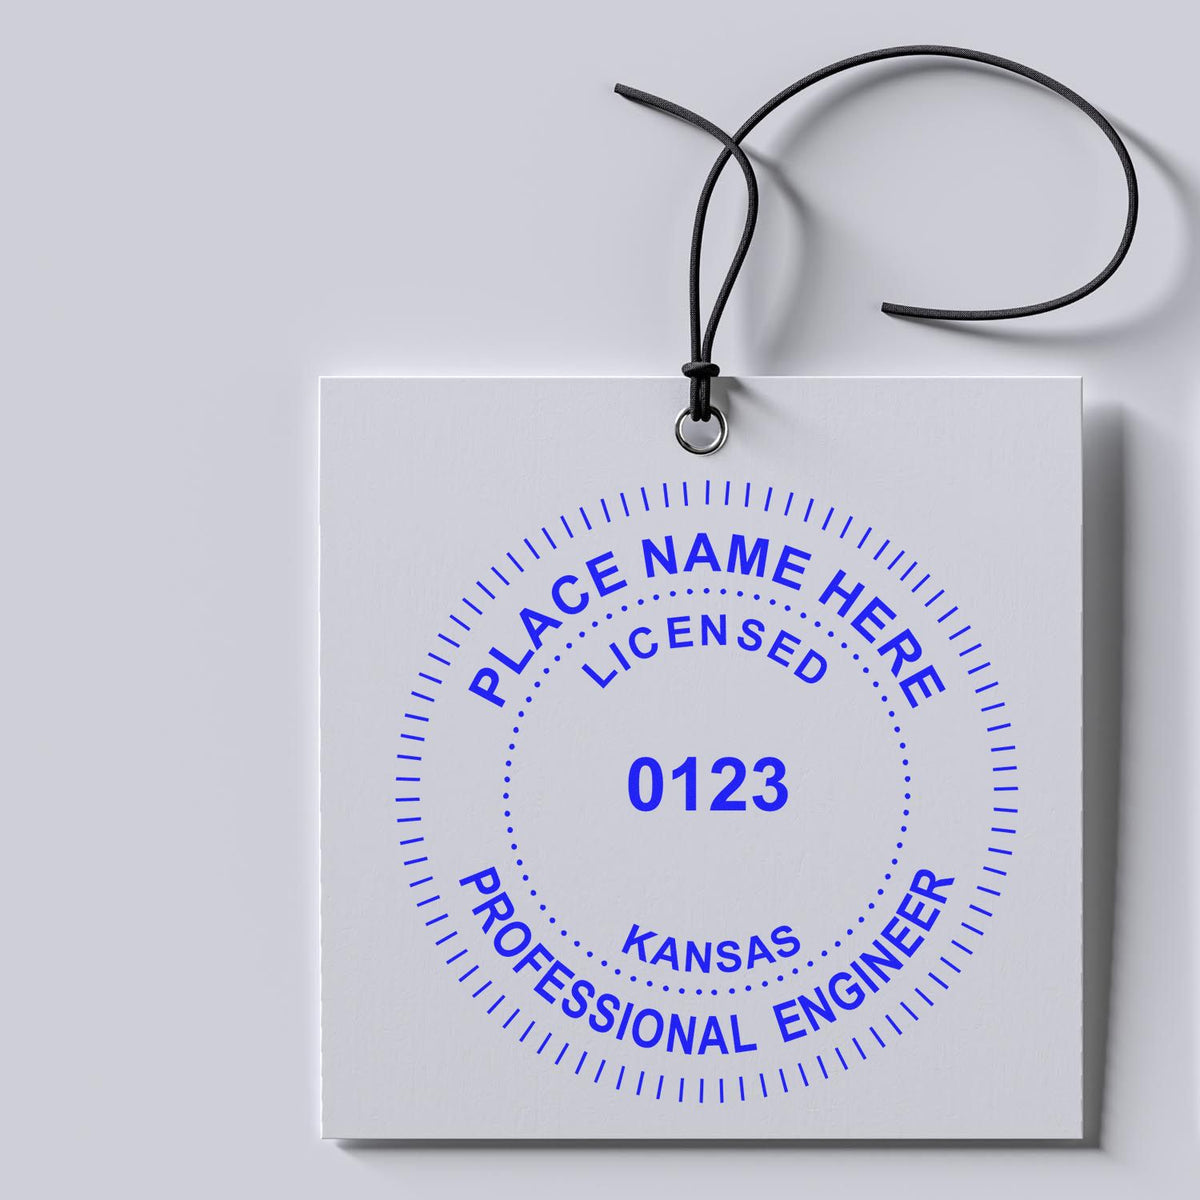 An alternative view of the Kansas Professional Engineer Seal Stamp stamped on a sheet of paper showing the image in use